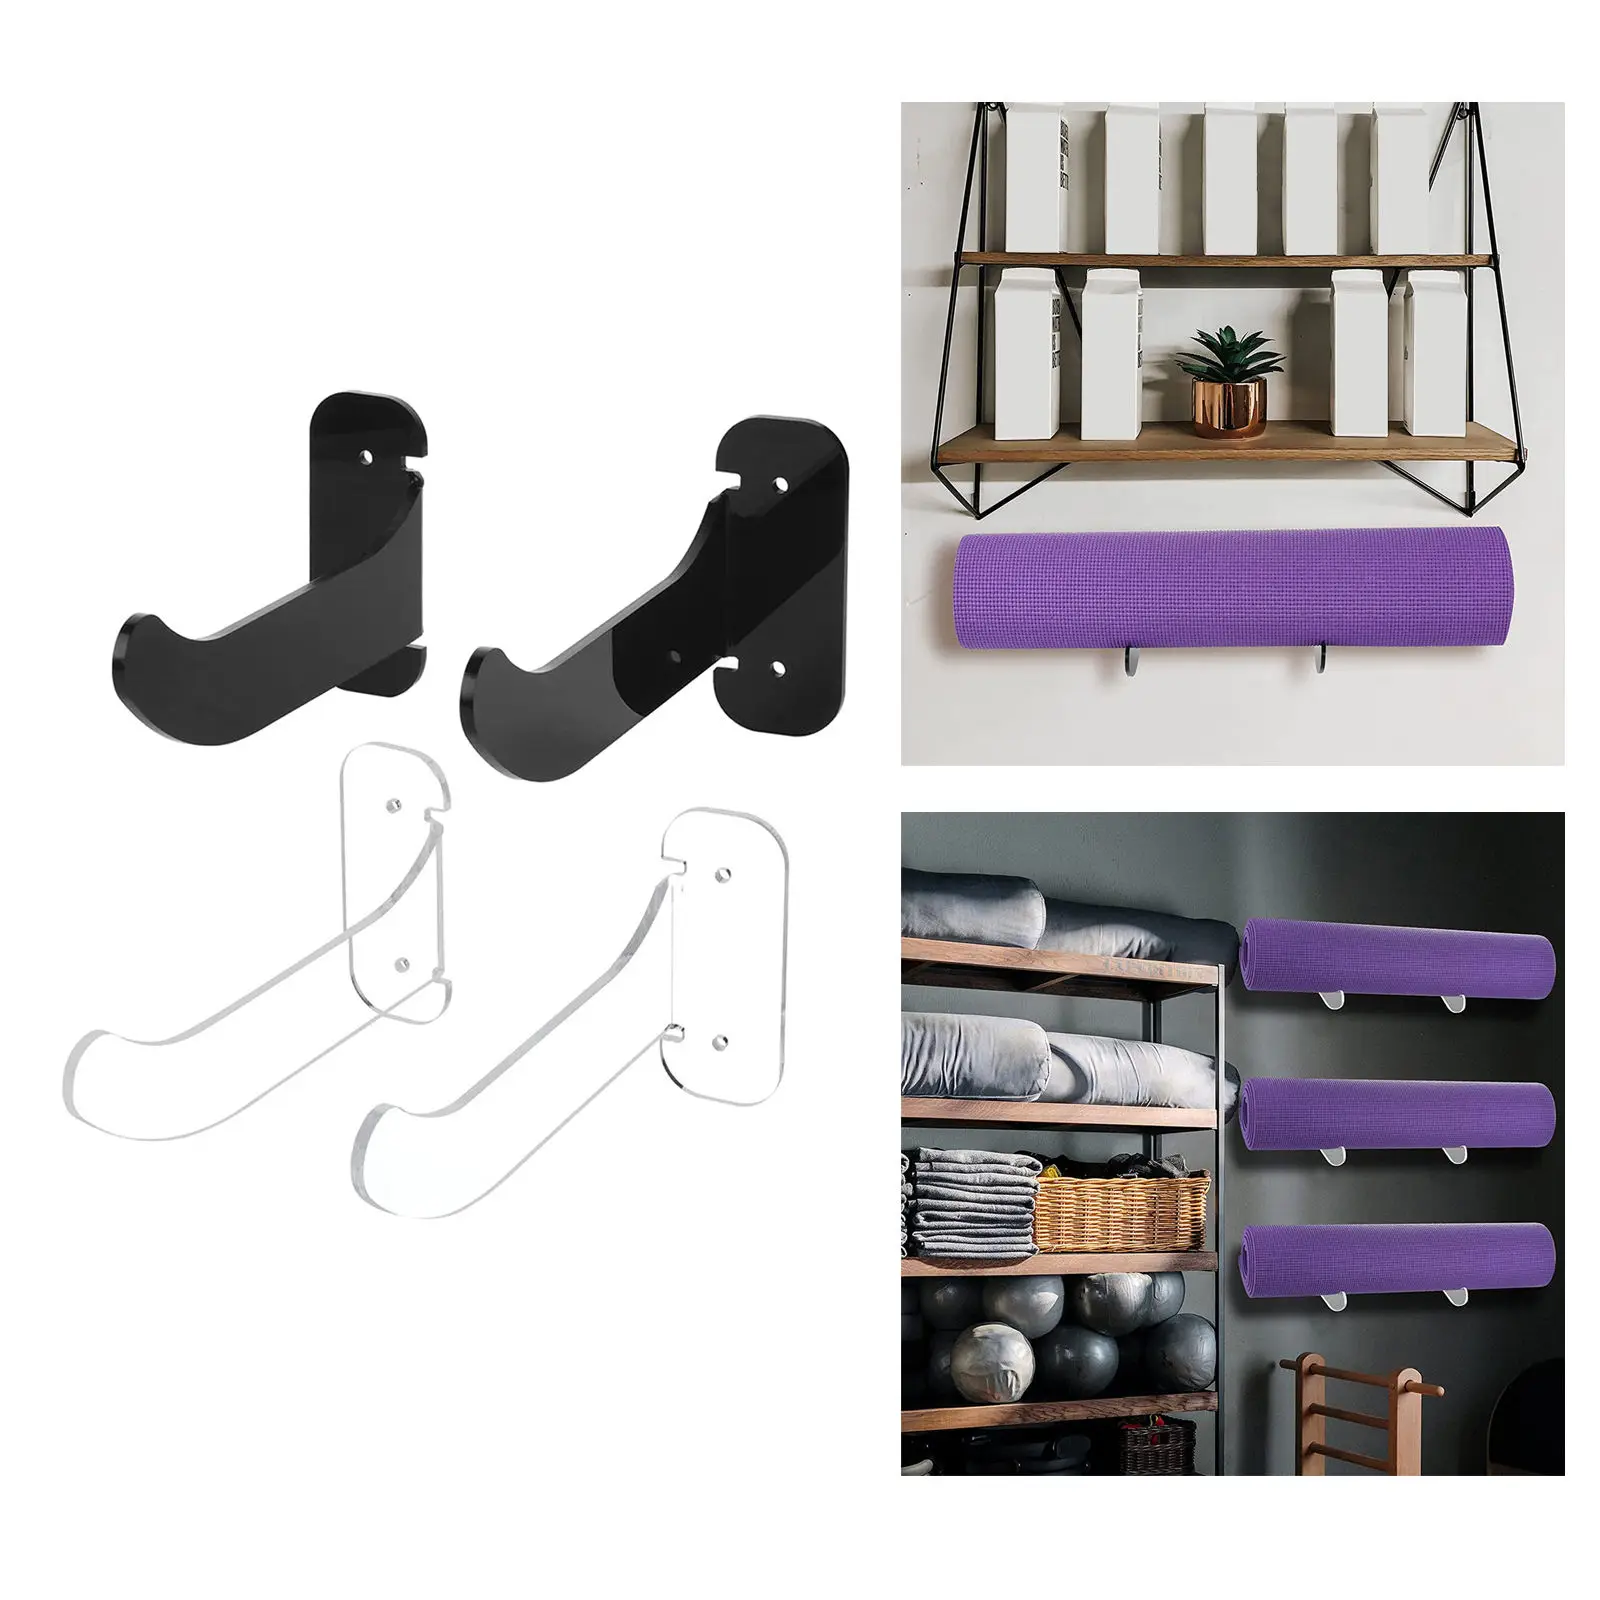 Yoga Mat Foam Rollers Rack Wall Mount Towel Rack Storage Holder Shelf for Fitness Class or Home Gym